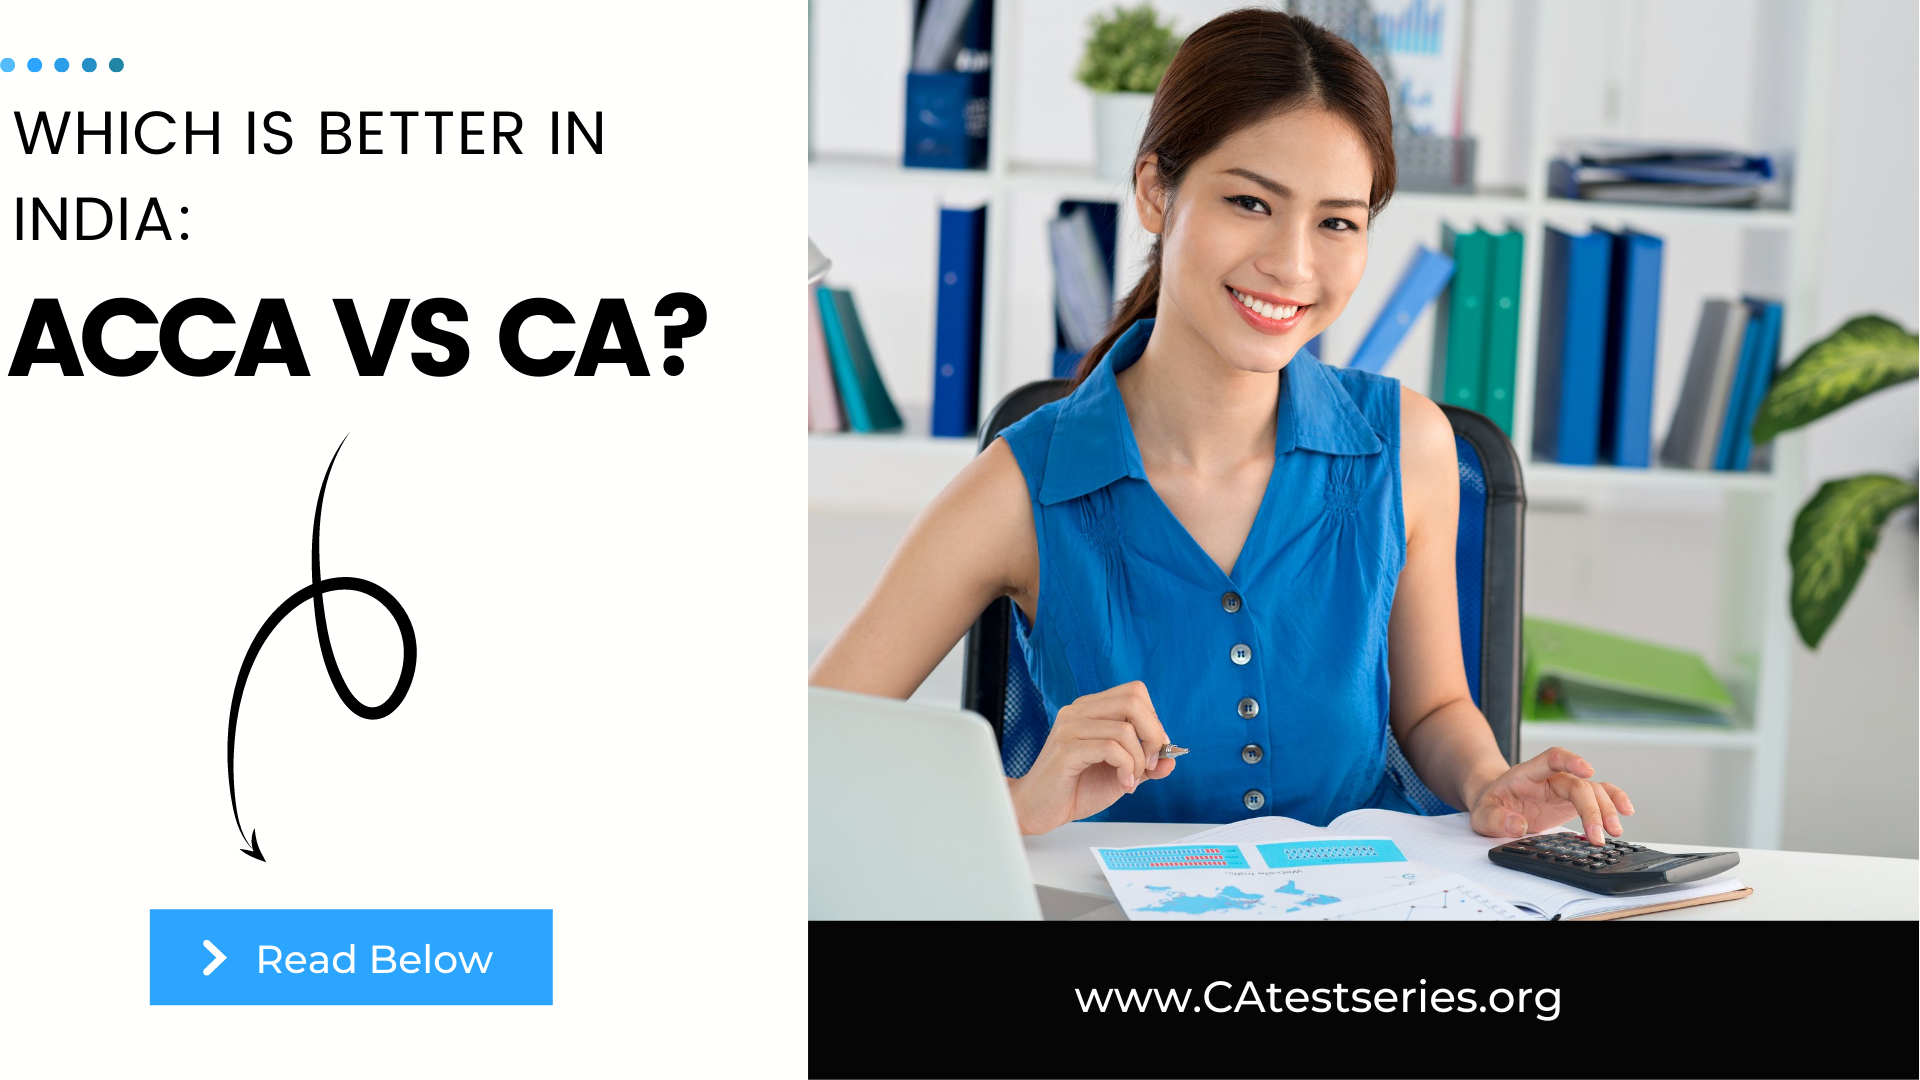 Among CA vs ACCA: Which Is Best In India?